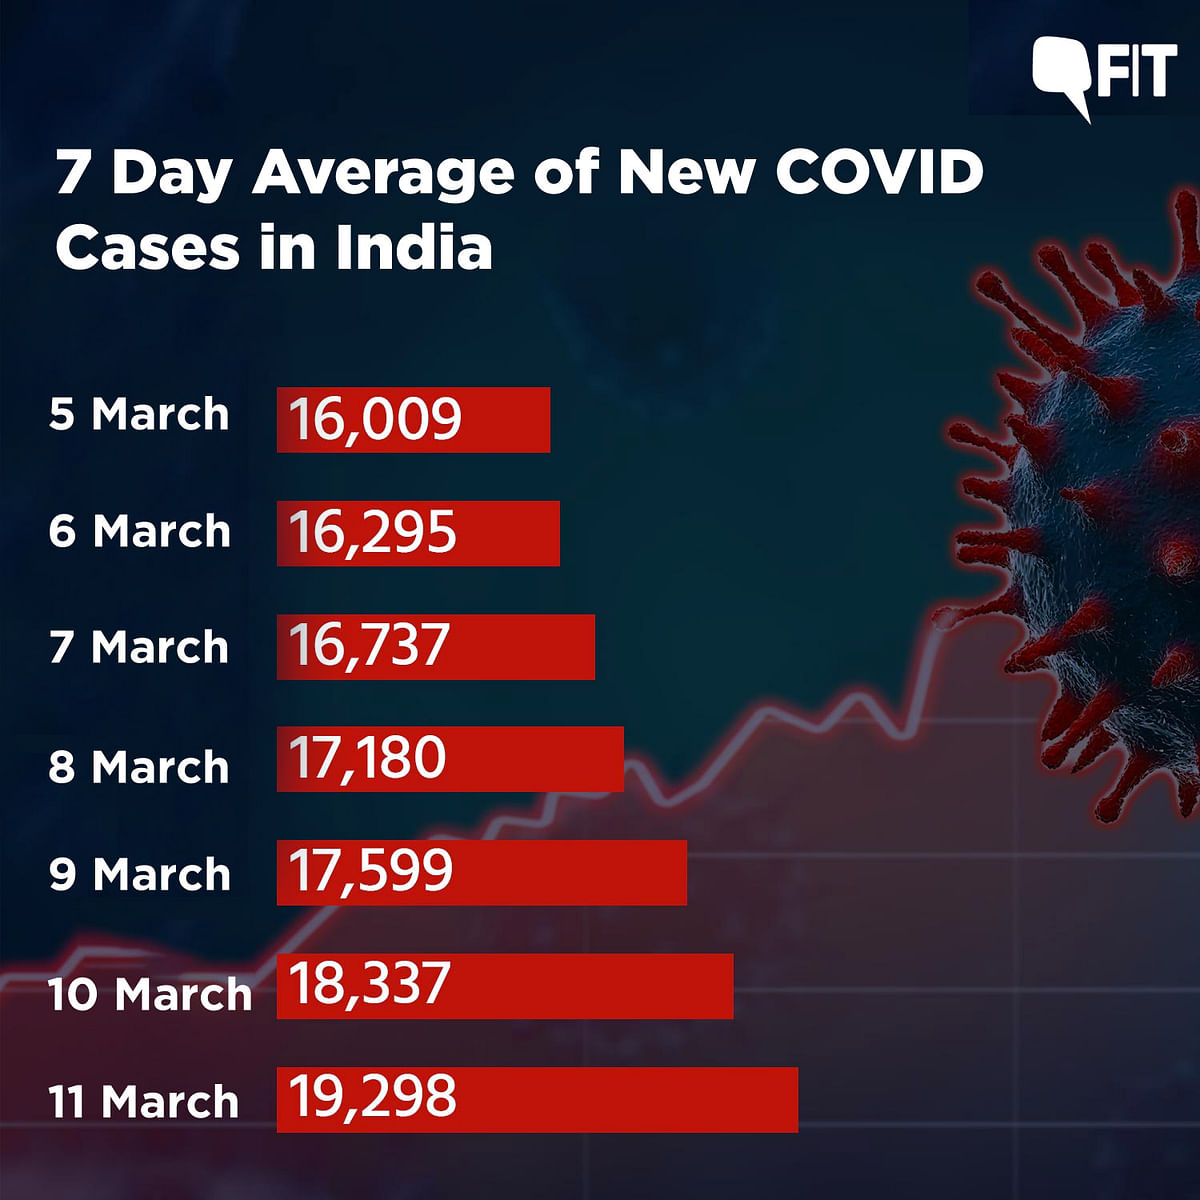 Looking at the Data: Is There a Second Wave of COVID in India?